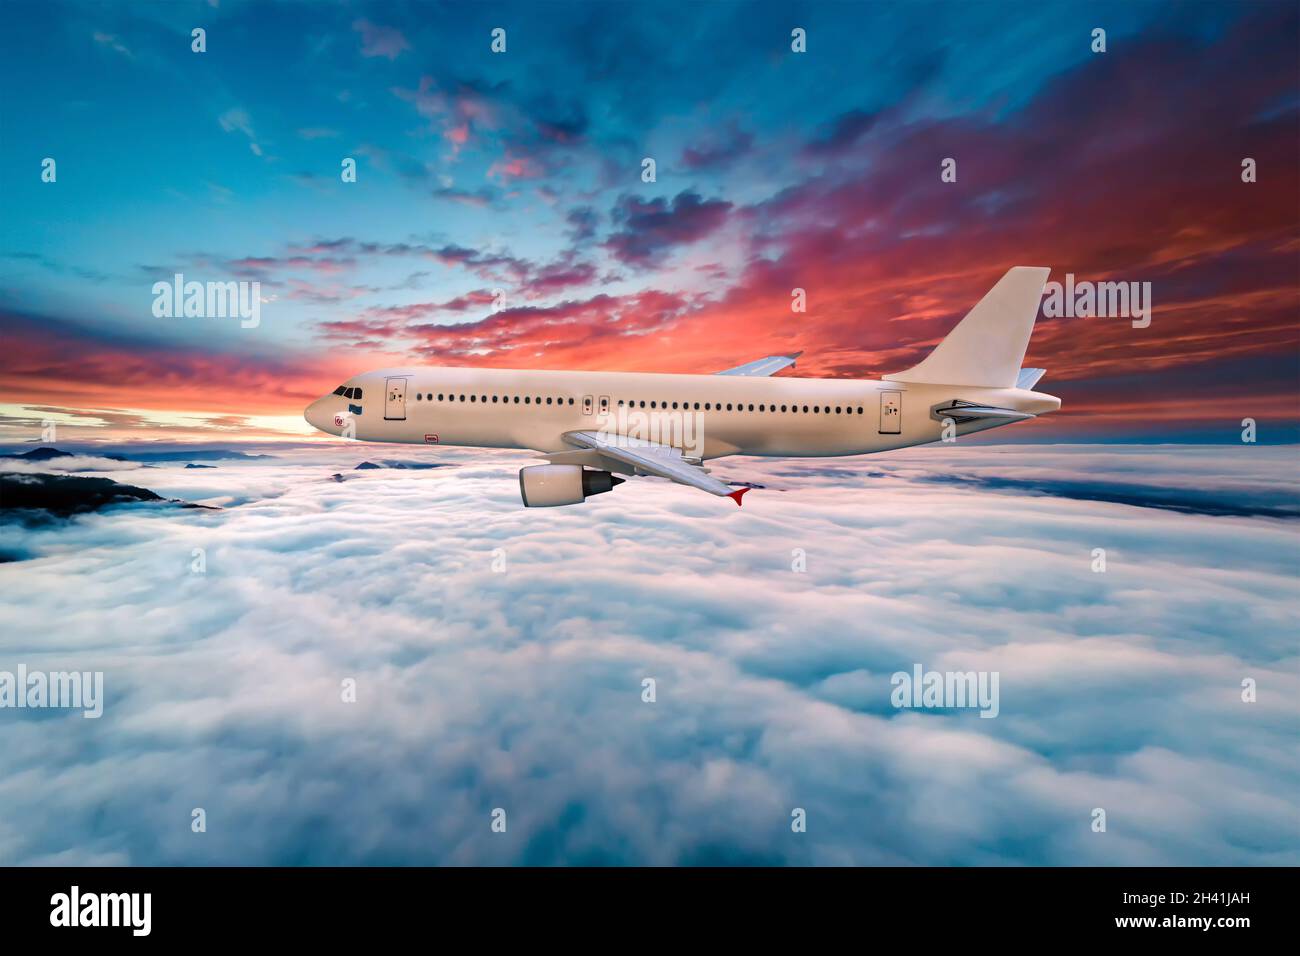 Airplane flying above the clouds at sunset Stock Photo